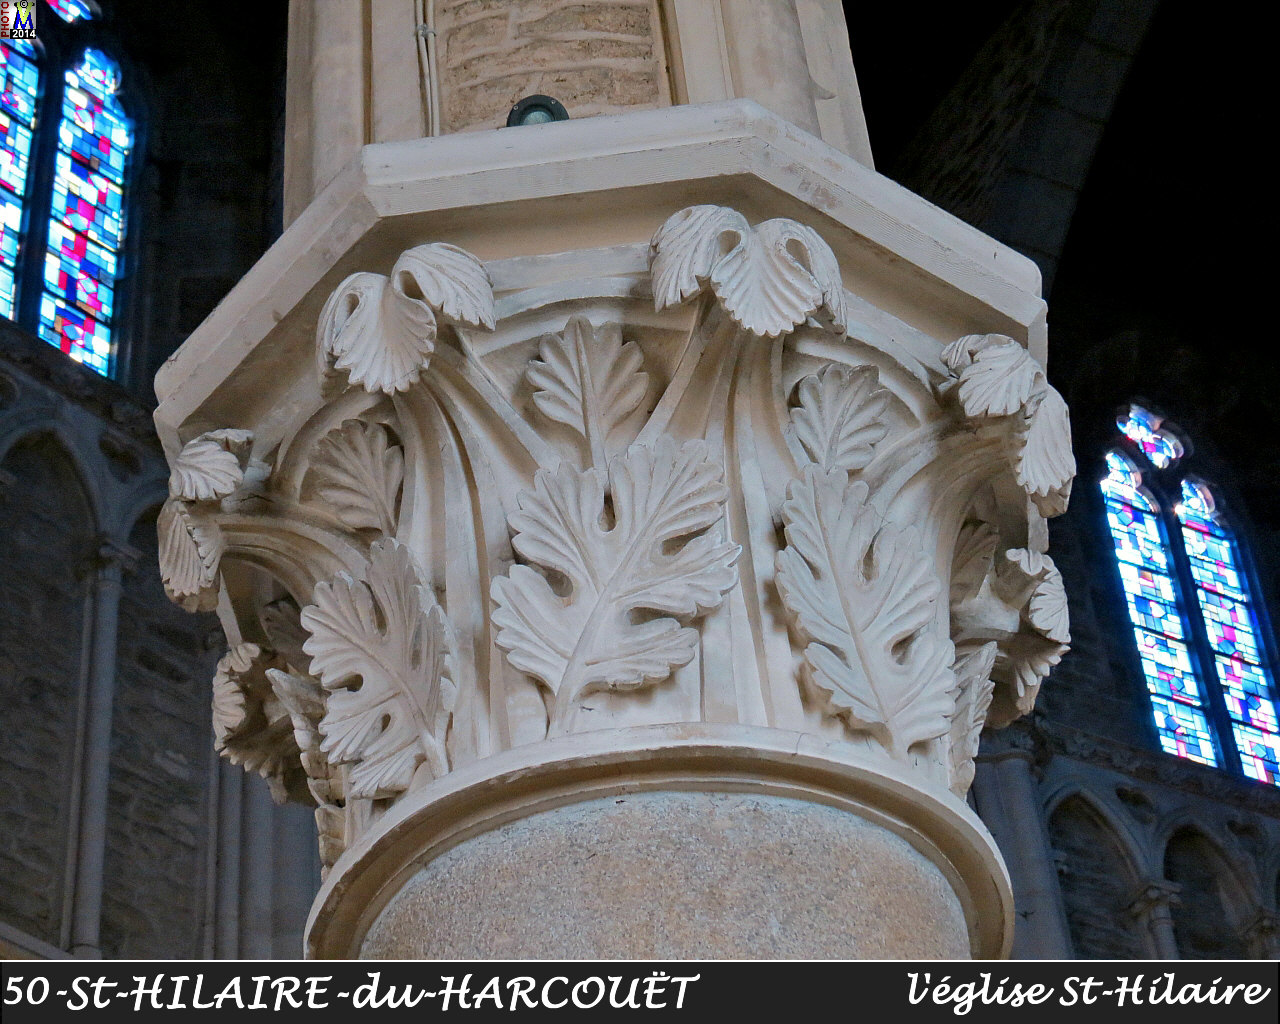 50StHILAIRE-HARCOUET_eglise_210.jpg